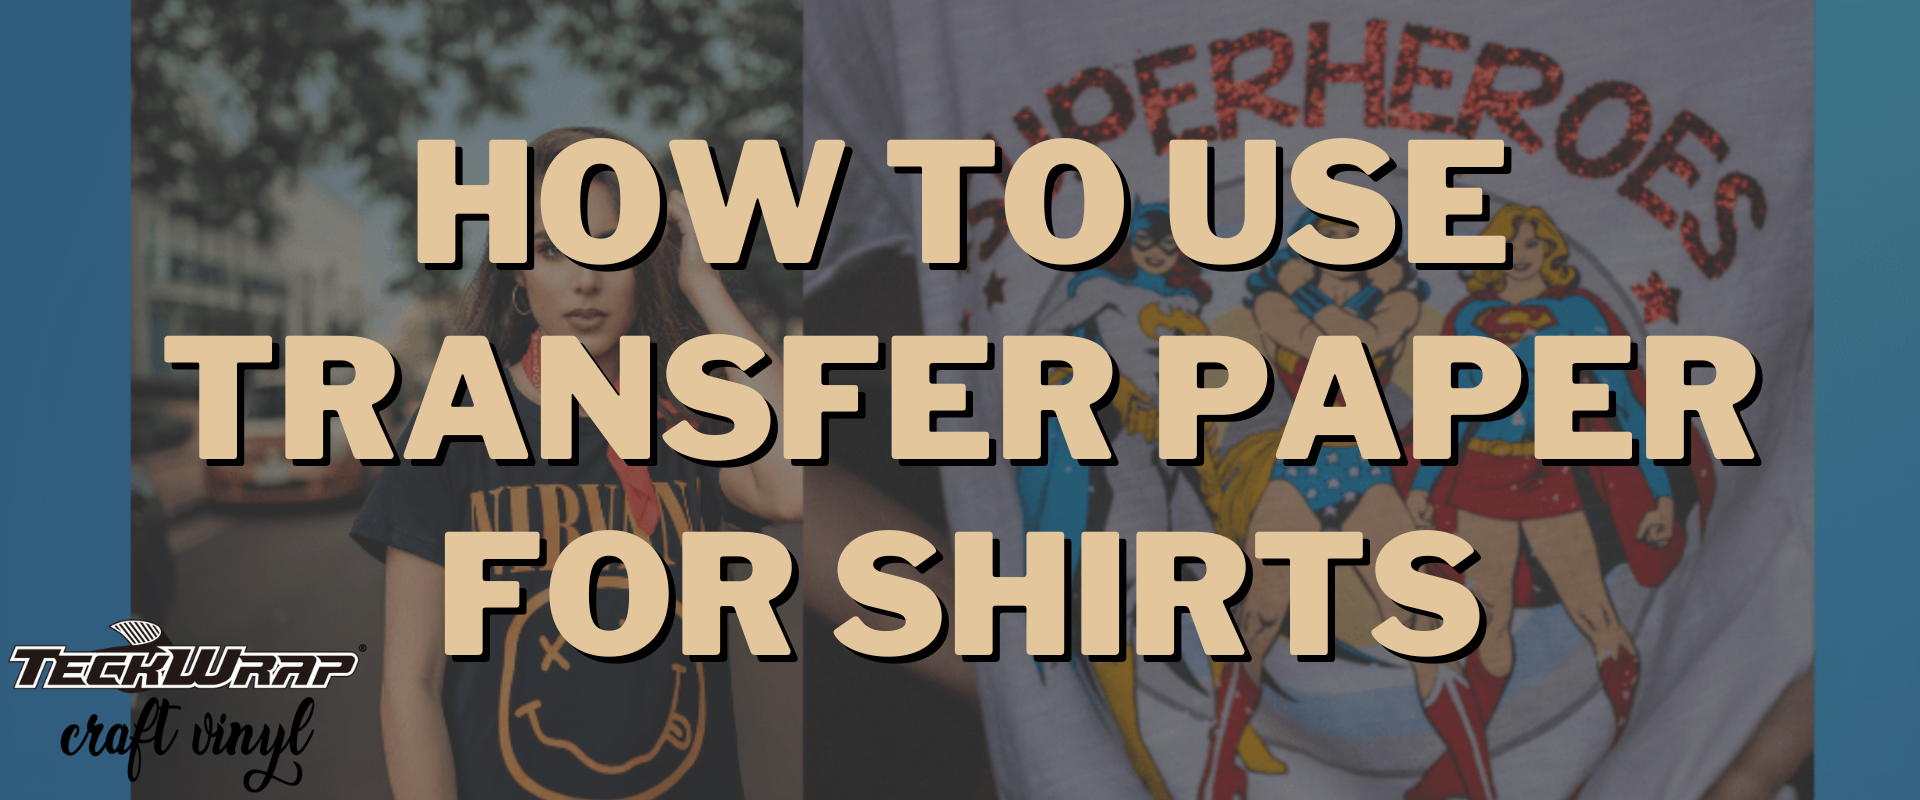 How To Use Transfer Paper For Shirts: The Ultimate Guide